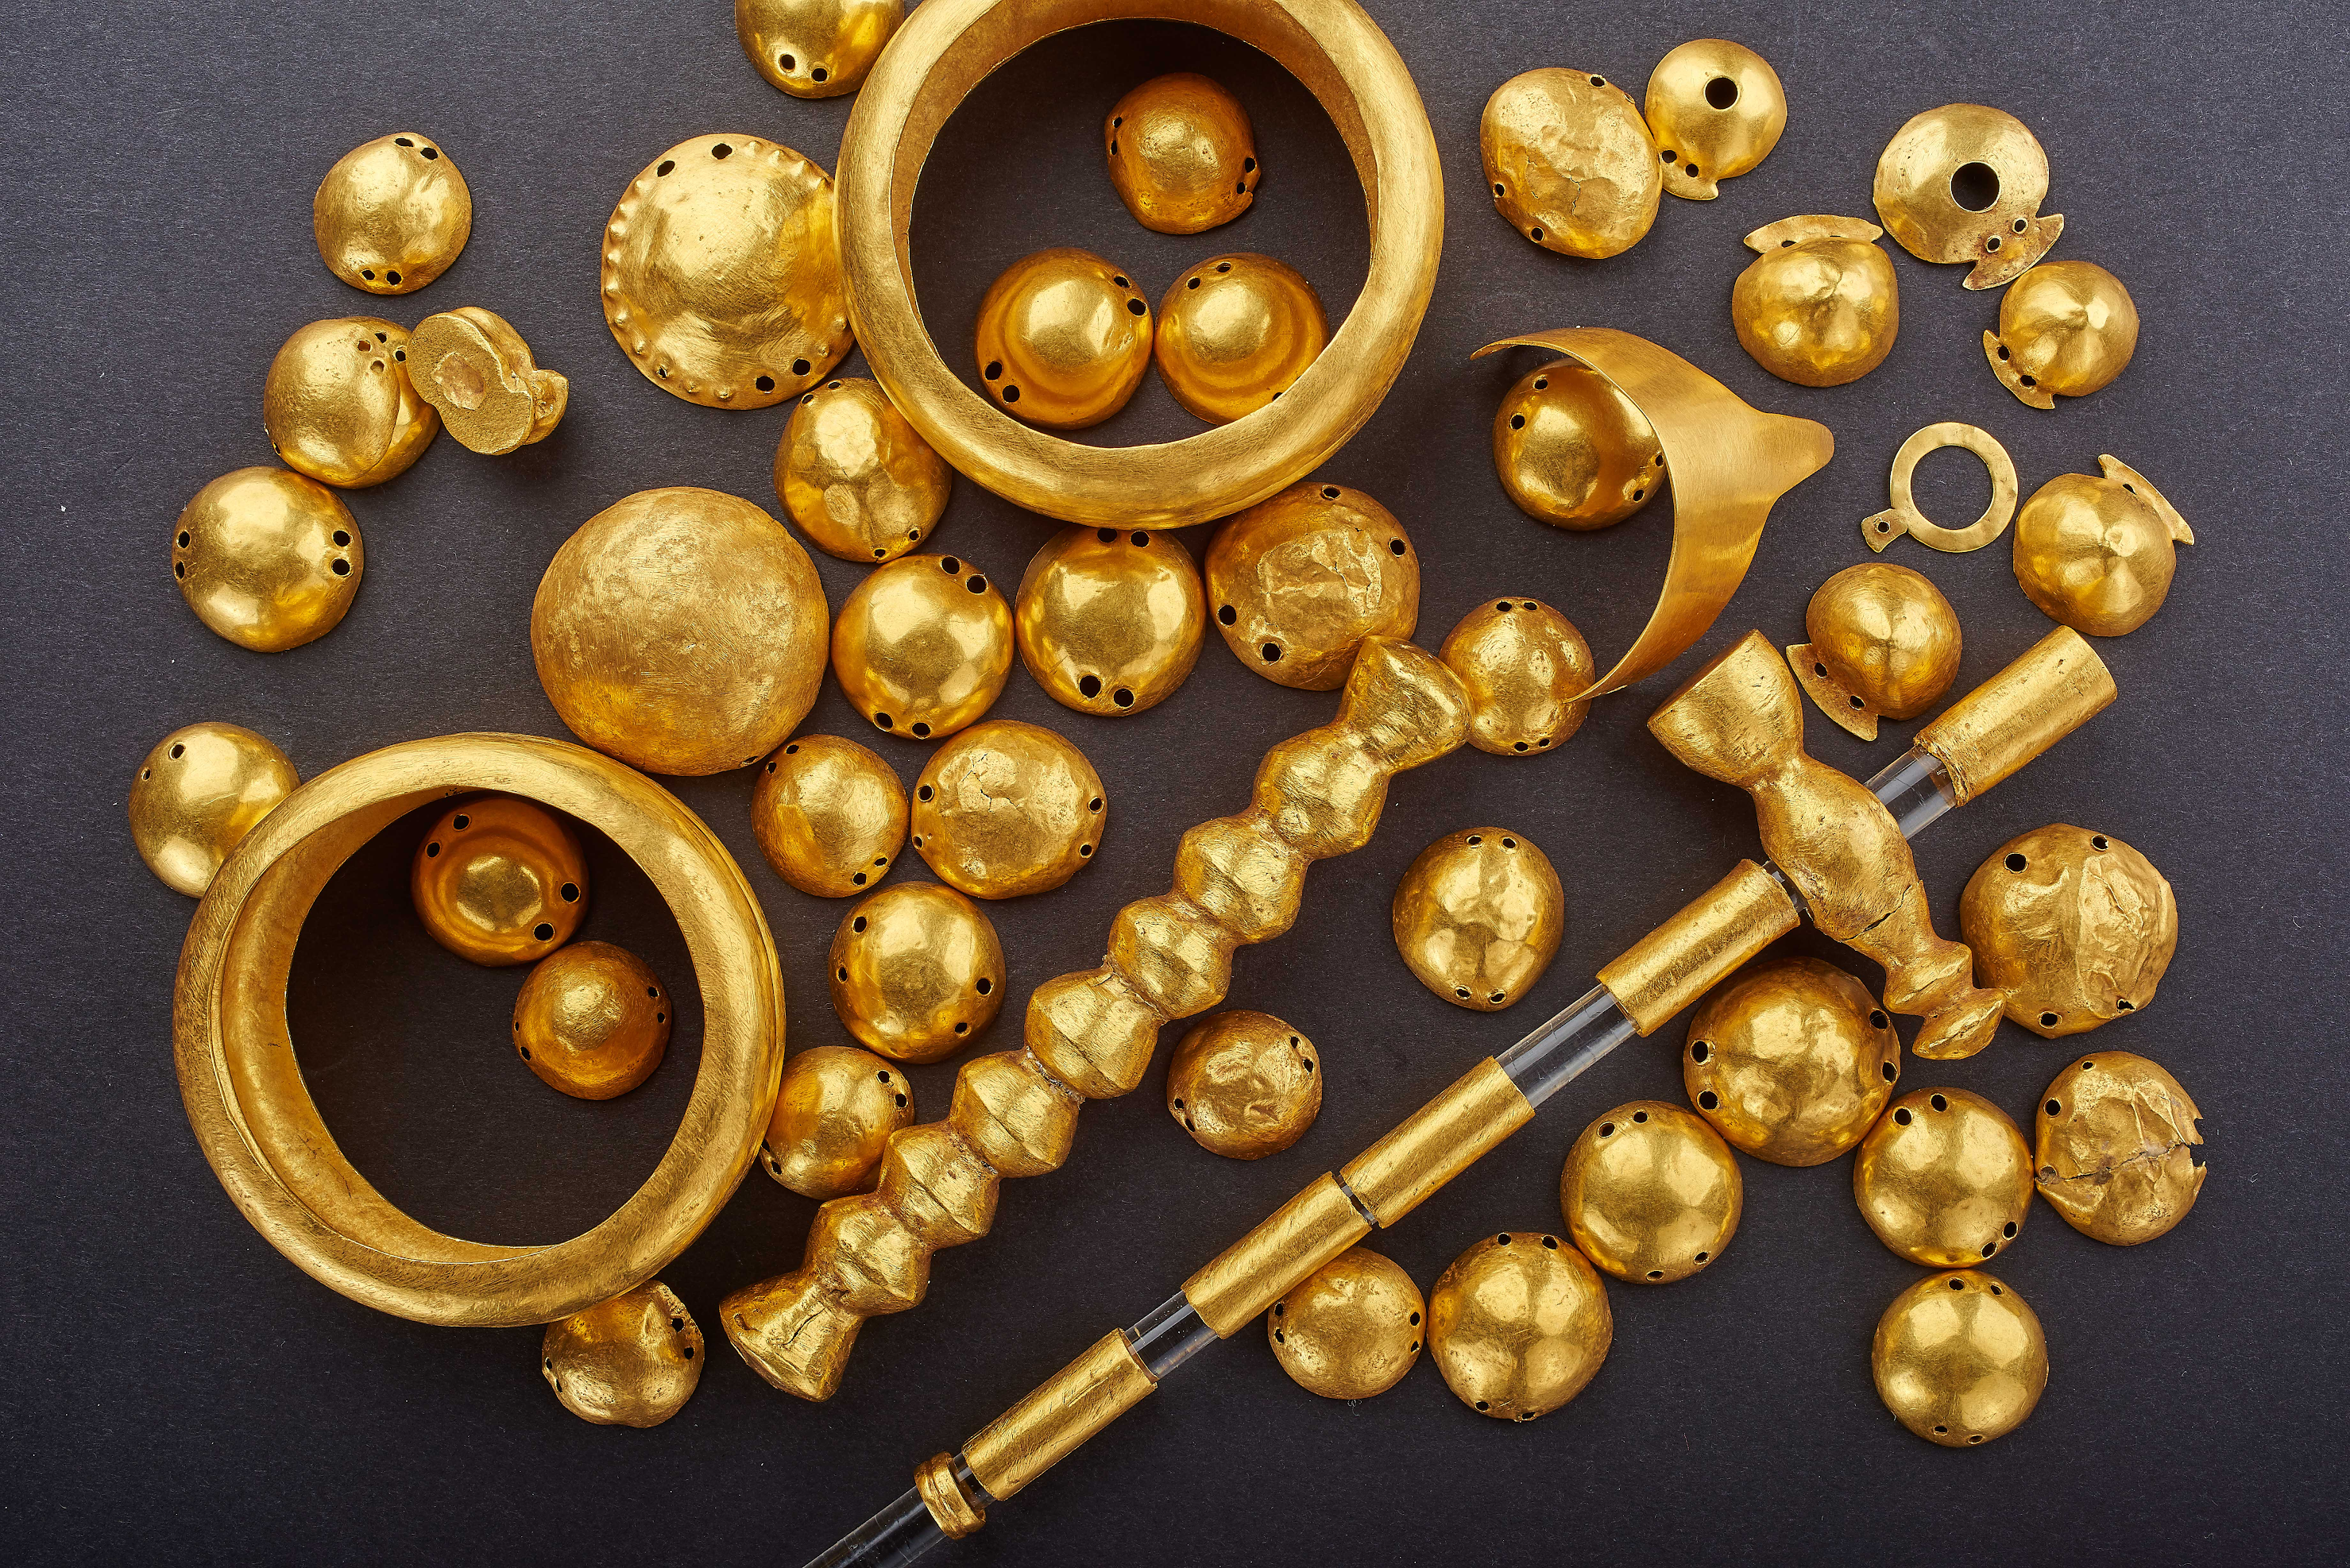 A selection of gold objects, including beads and rings arranged on a black background.